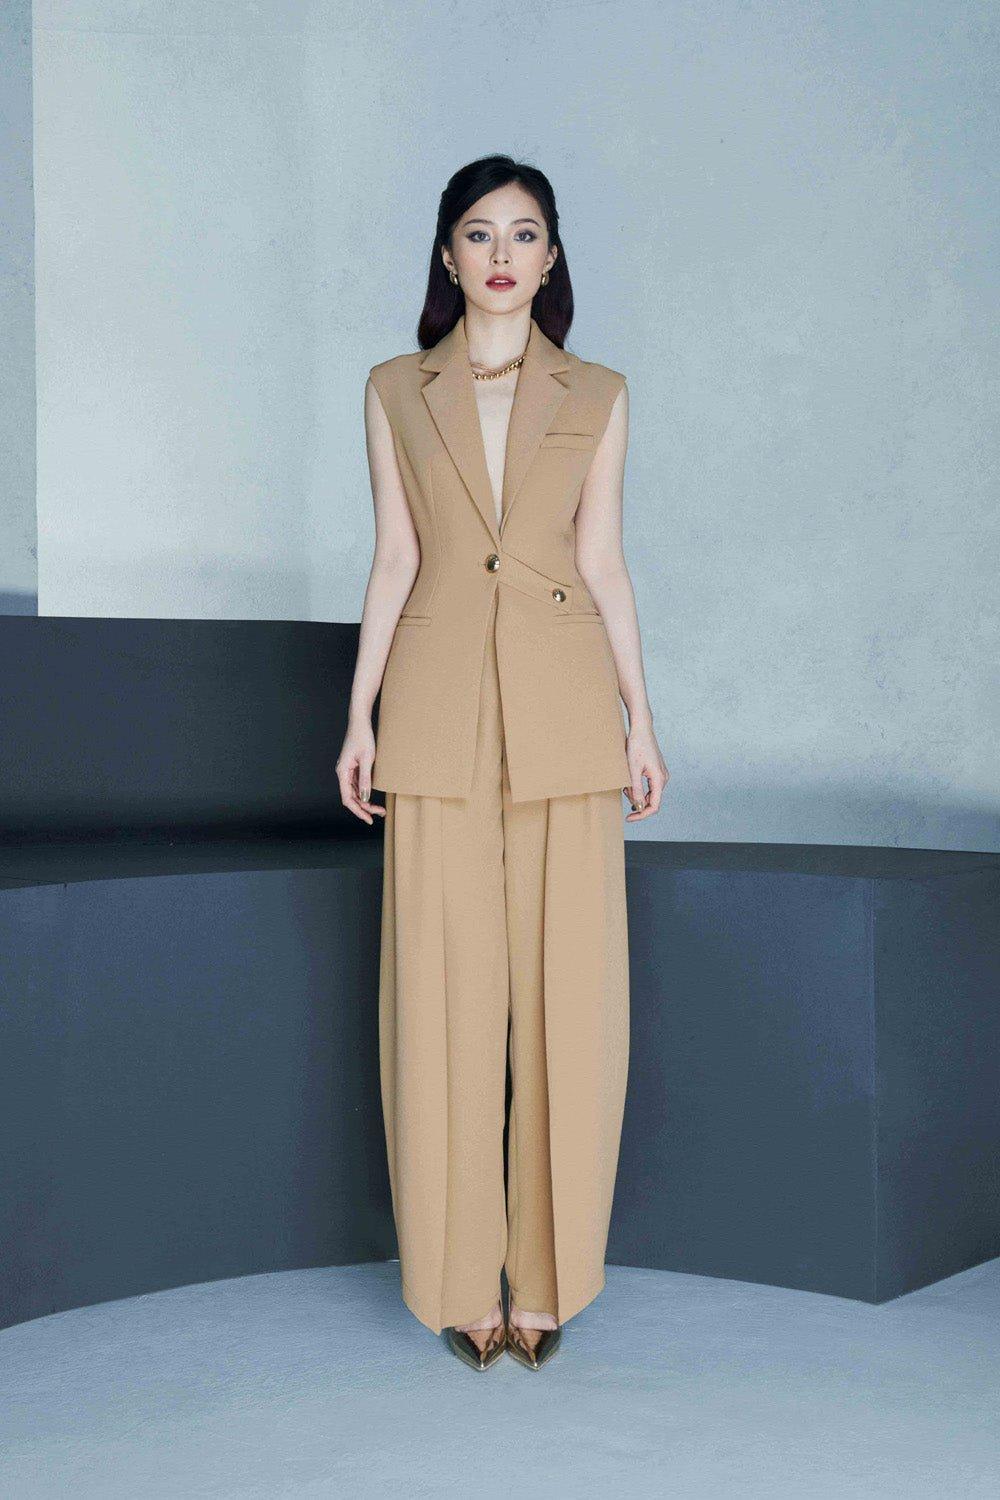 SHEIN Slayr Sleeveless Suit Jacket With Front Tie Knot And Trousers,  Women's Suit Set | SHEIN USA